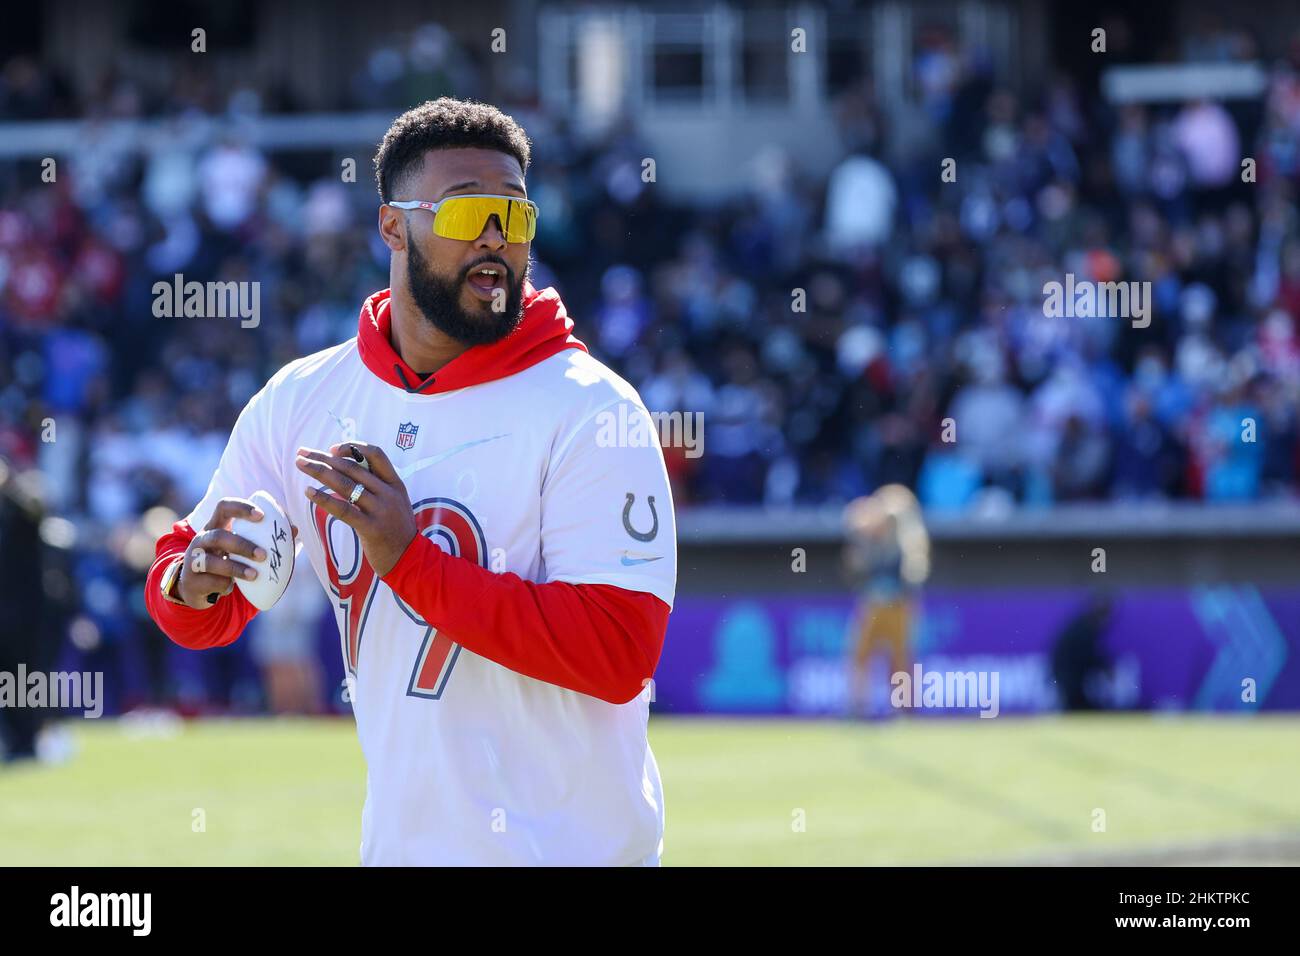 Las Vegas, Nevada, USA. 5th Feb, 2022. Indianapolis Colts defensive line DeForest Buckner (99) signed a souvenir football and is throwing it into the crowd during the AFC Pro Bowl Practice at Las Vegas Ballpark in Las Vegas, Nevada. Darren Lee/CSM/Alamy Live News Stock Photo